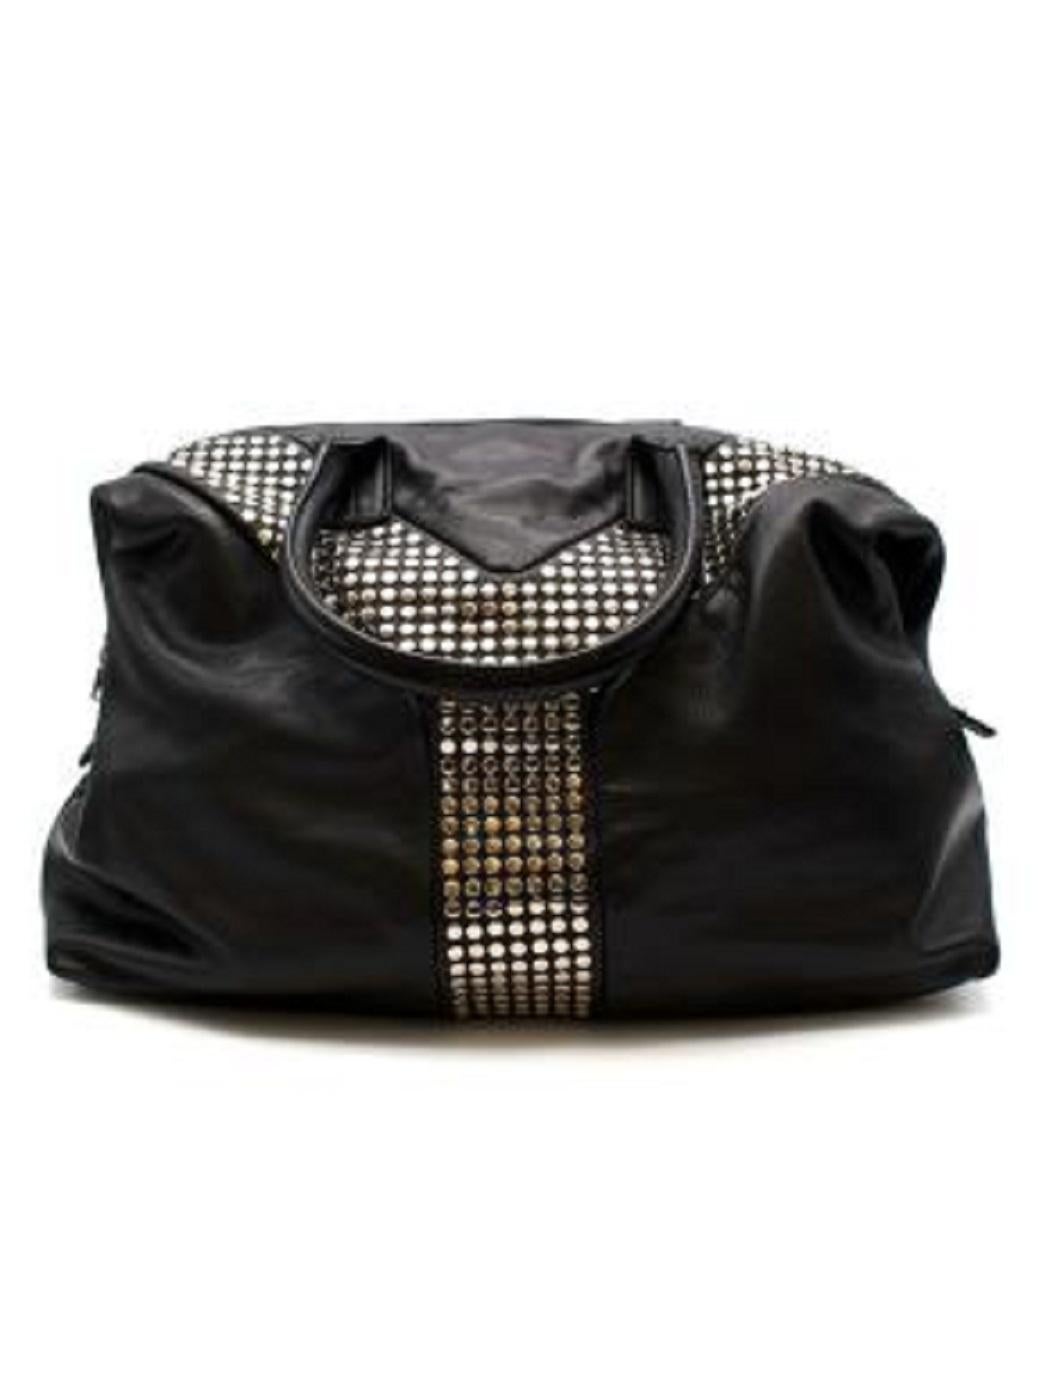 Yves Saint Laurent Black Studded Leather Easy Y Tote 

- Medium sized pebbled leather slouchy bag with circular silver studs
- Rolled top handles 
- Flat silver studs in Y shape on both sides
- Flat base with silver feet
- Silver zip closure
- Black